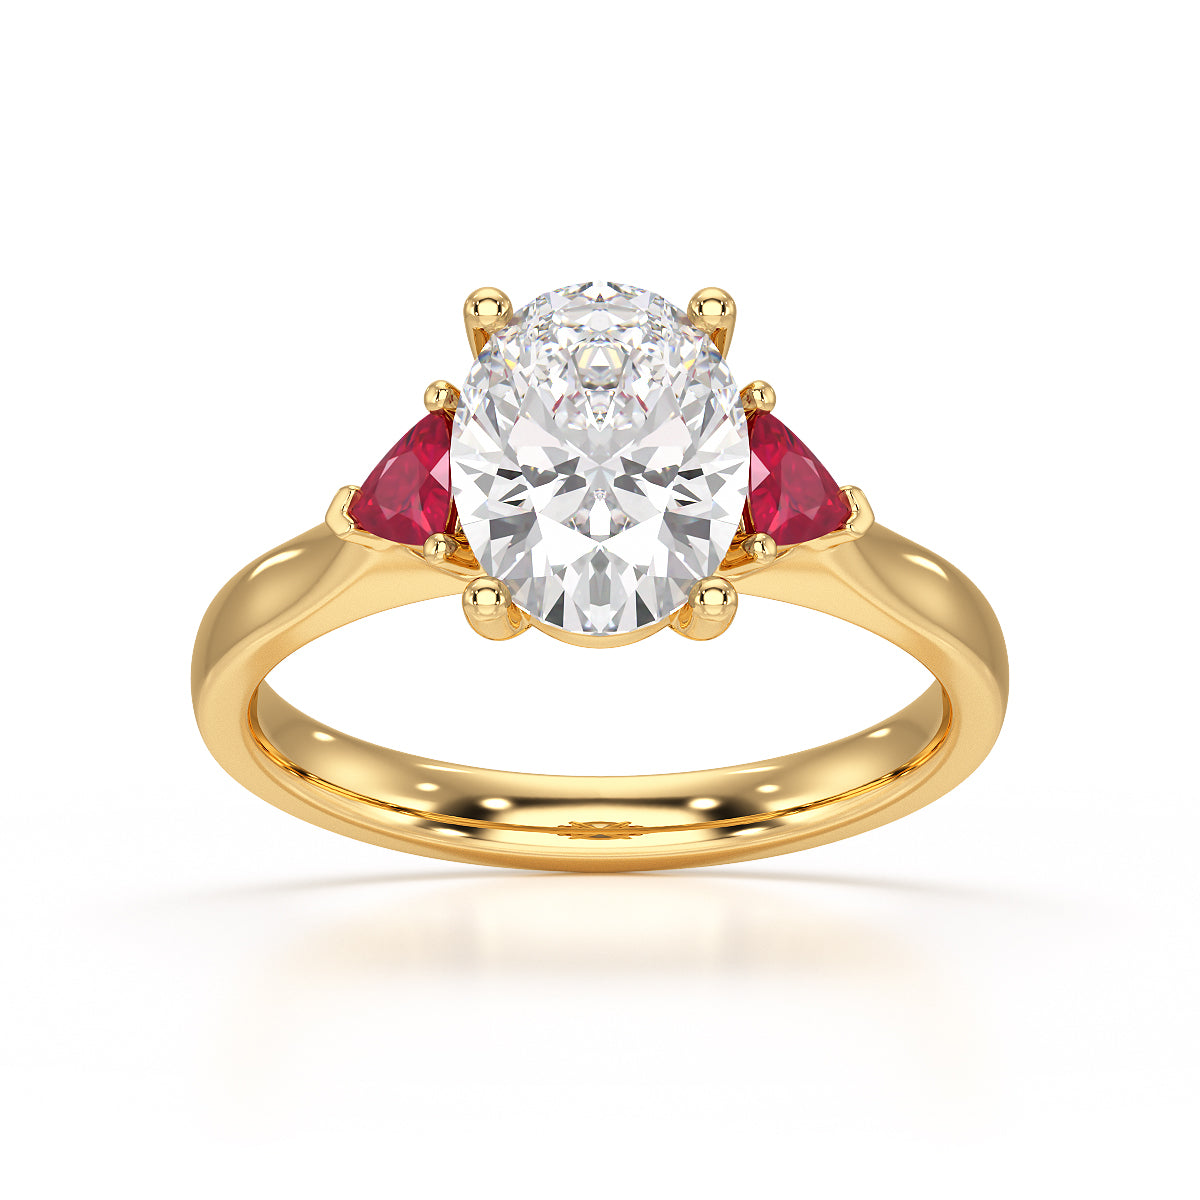 Oval trilogy with trillion side rubies stones Dress ring